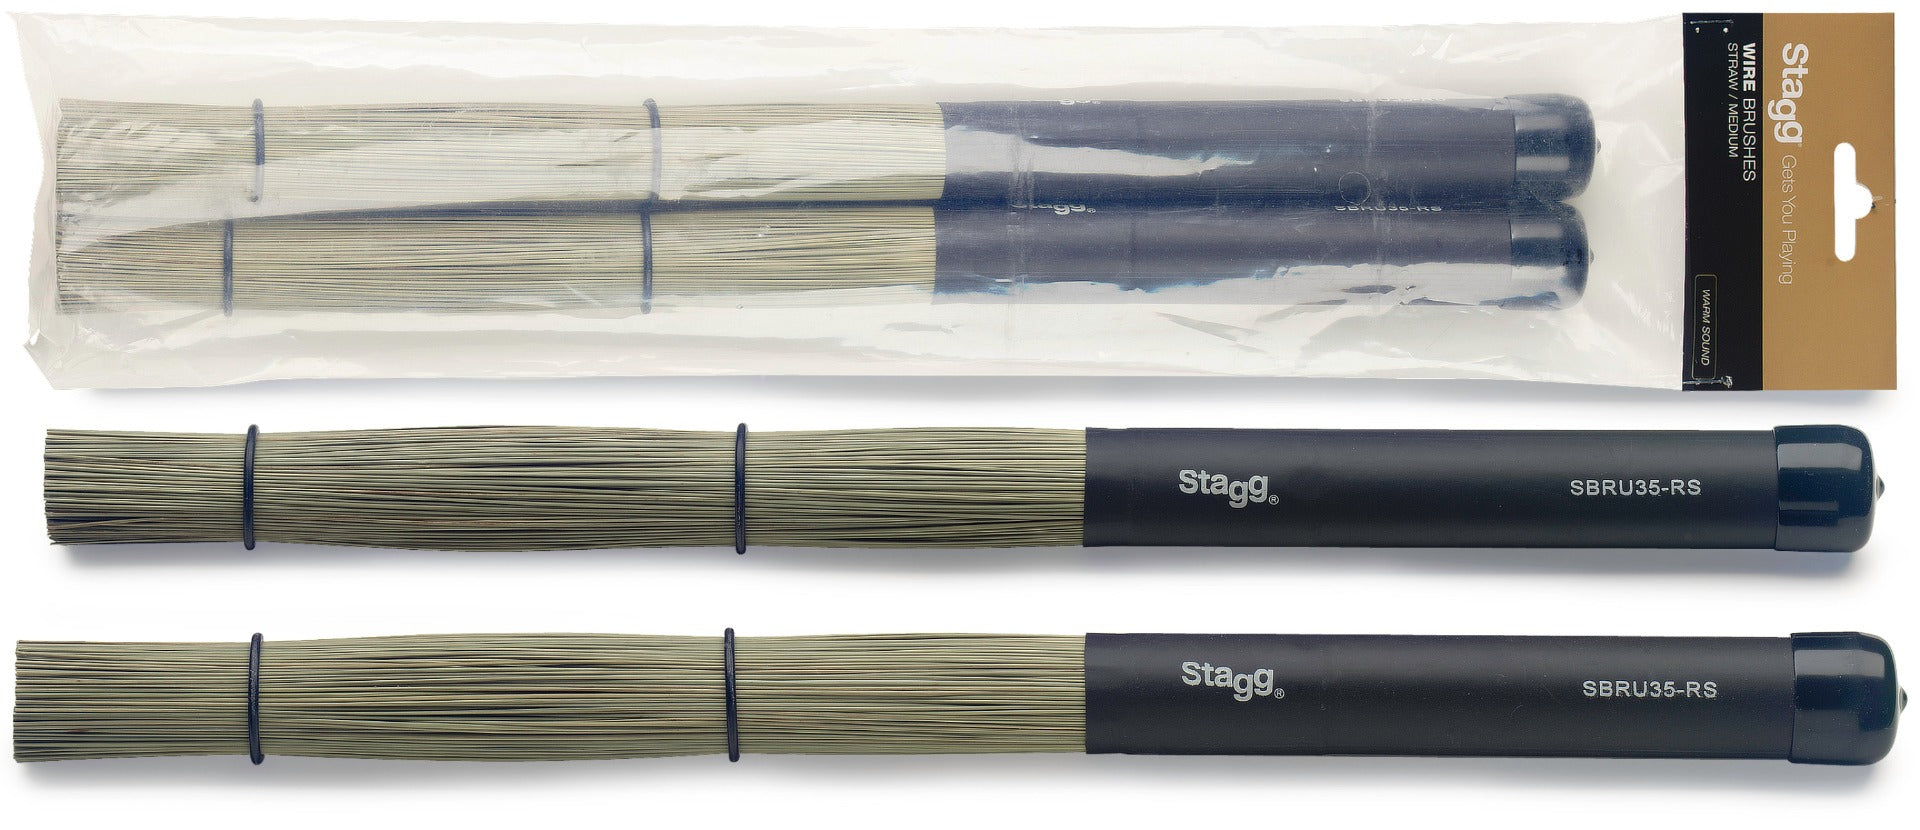 Stagg Polybristle Nylon Brushes with Black Rubber Handle Grip